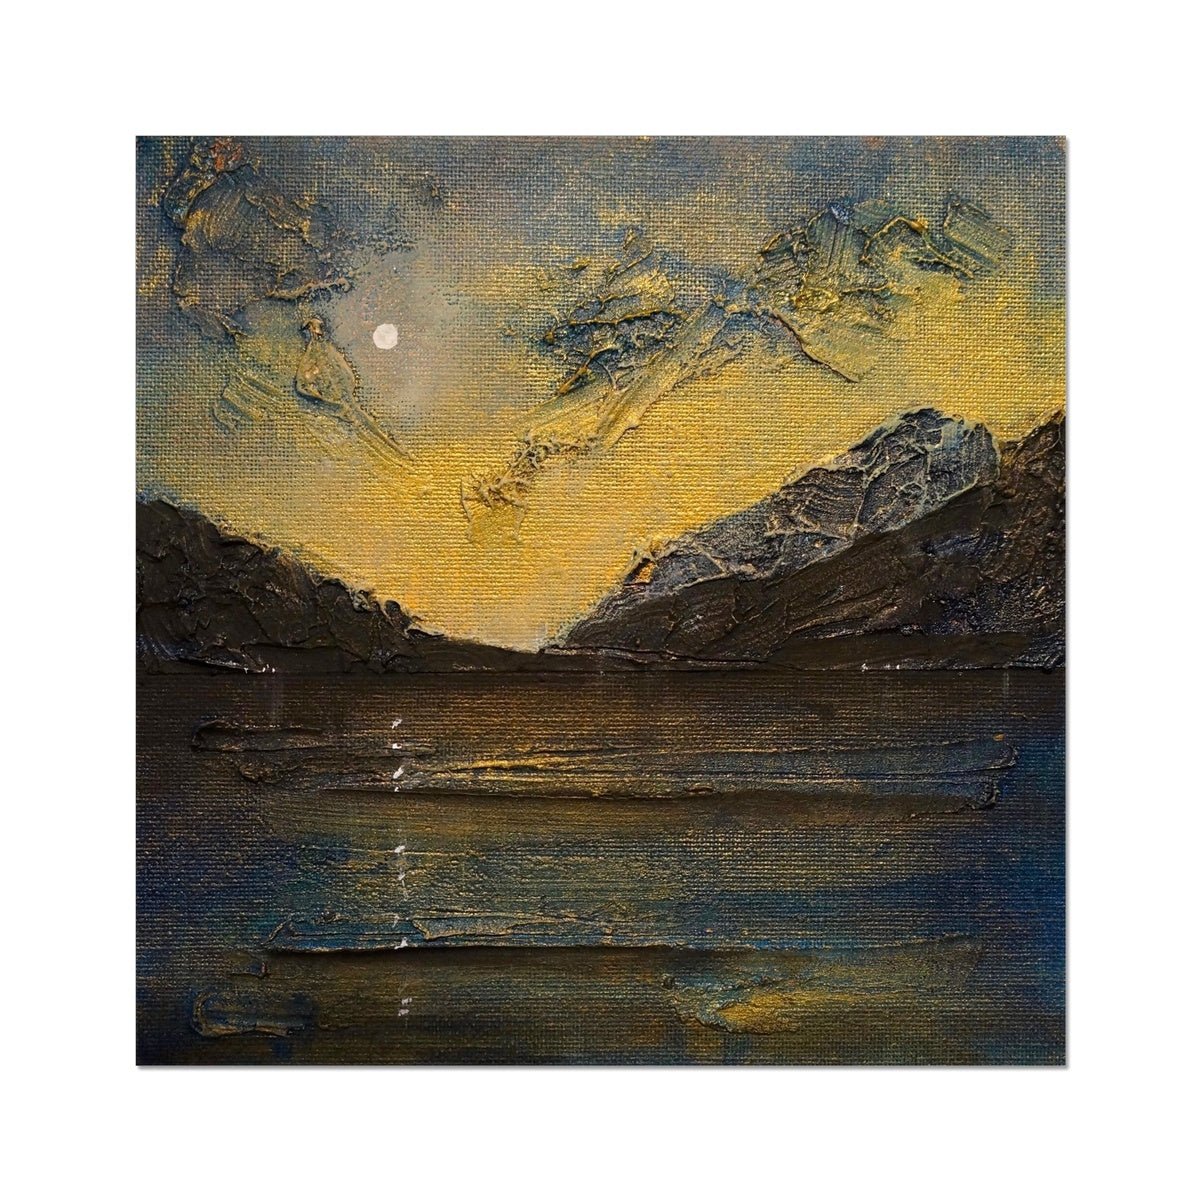 Loch Lomond Moonlight Painting | Artist Proof Collector Prints From Scotland-Artist Proof Collector Prints-Scottish Lochs & Mountains Art Gallery-20"x20"-Paintings, Prints, Homeware, Art Gifts From Scotland By Scottish Artist Kevin Hunter